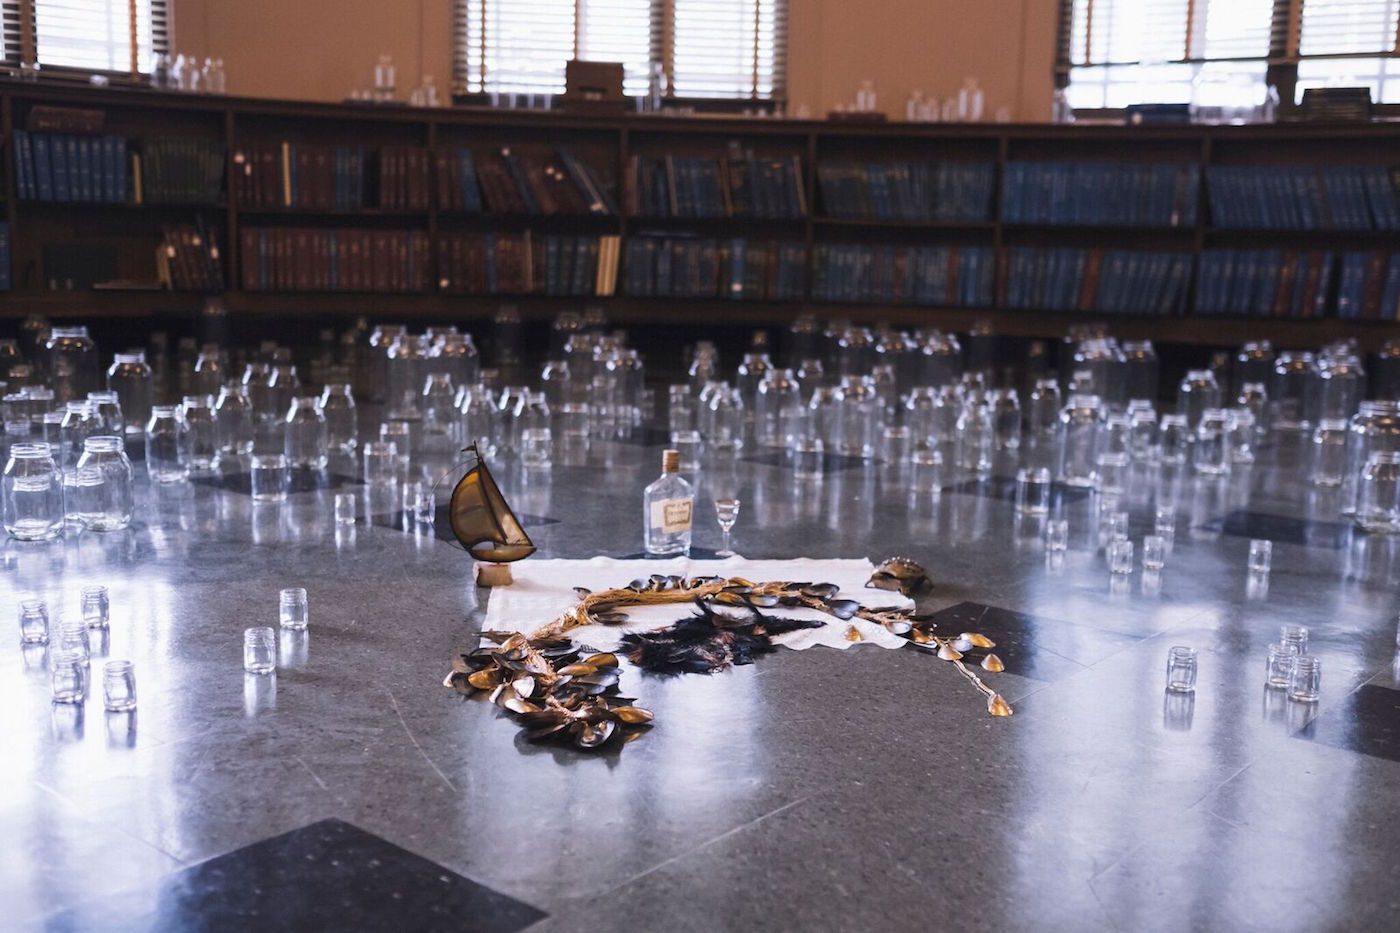 Skillman Library: Bree Gant, Otherlogue, 2019, glass jars, mussels, iron, resin, bees, cowries. Designed and produced on behalf of ifa with support of Contemporary And (C&) and in the in the framework of the German campaign Wunderbar Together – The Year of German-American Friendship https://wunderbartogether.org/about/ , initiated by the German Federal Foreign Office (AA), the Goethe-Institut, and supported by the Federation of German Industries (BDI). Photographer: Kashira Dowridge